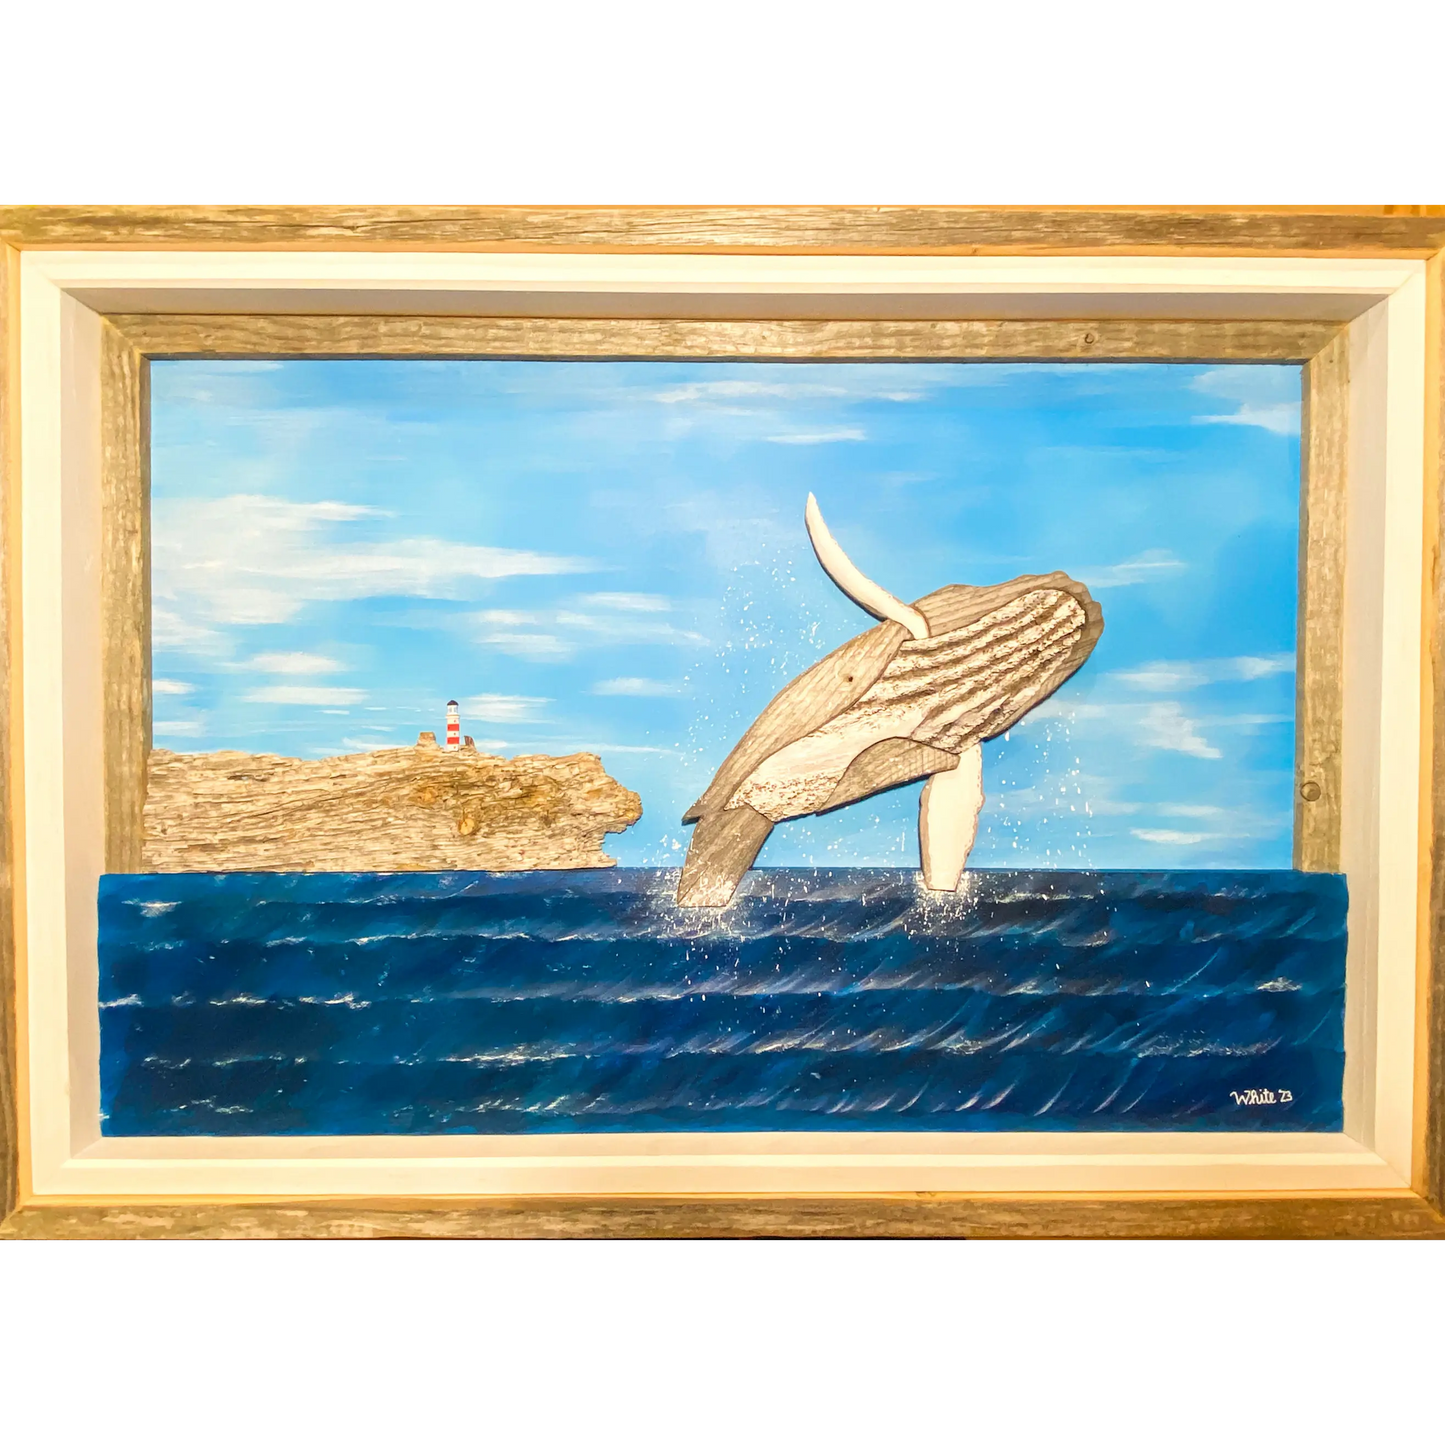 "The Breach" is an original driftwood mixed-media art piece that captures a humpback whale breaching out of the ocean near Newfoundland's shores with a hill and a lighthouse in the background.